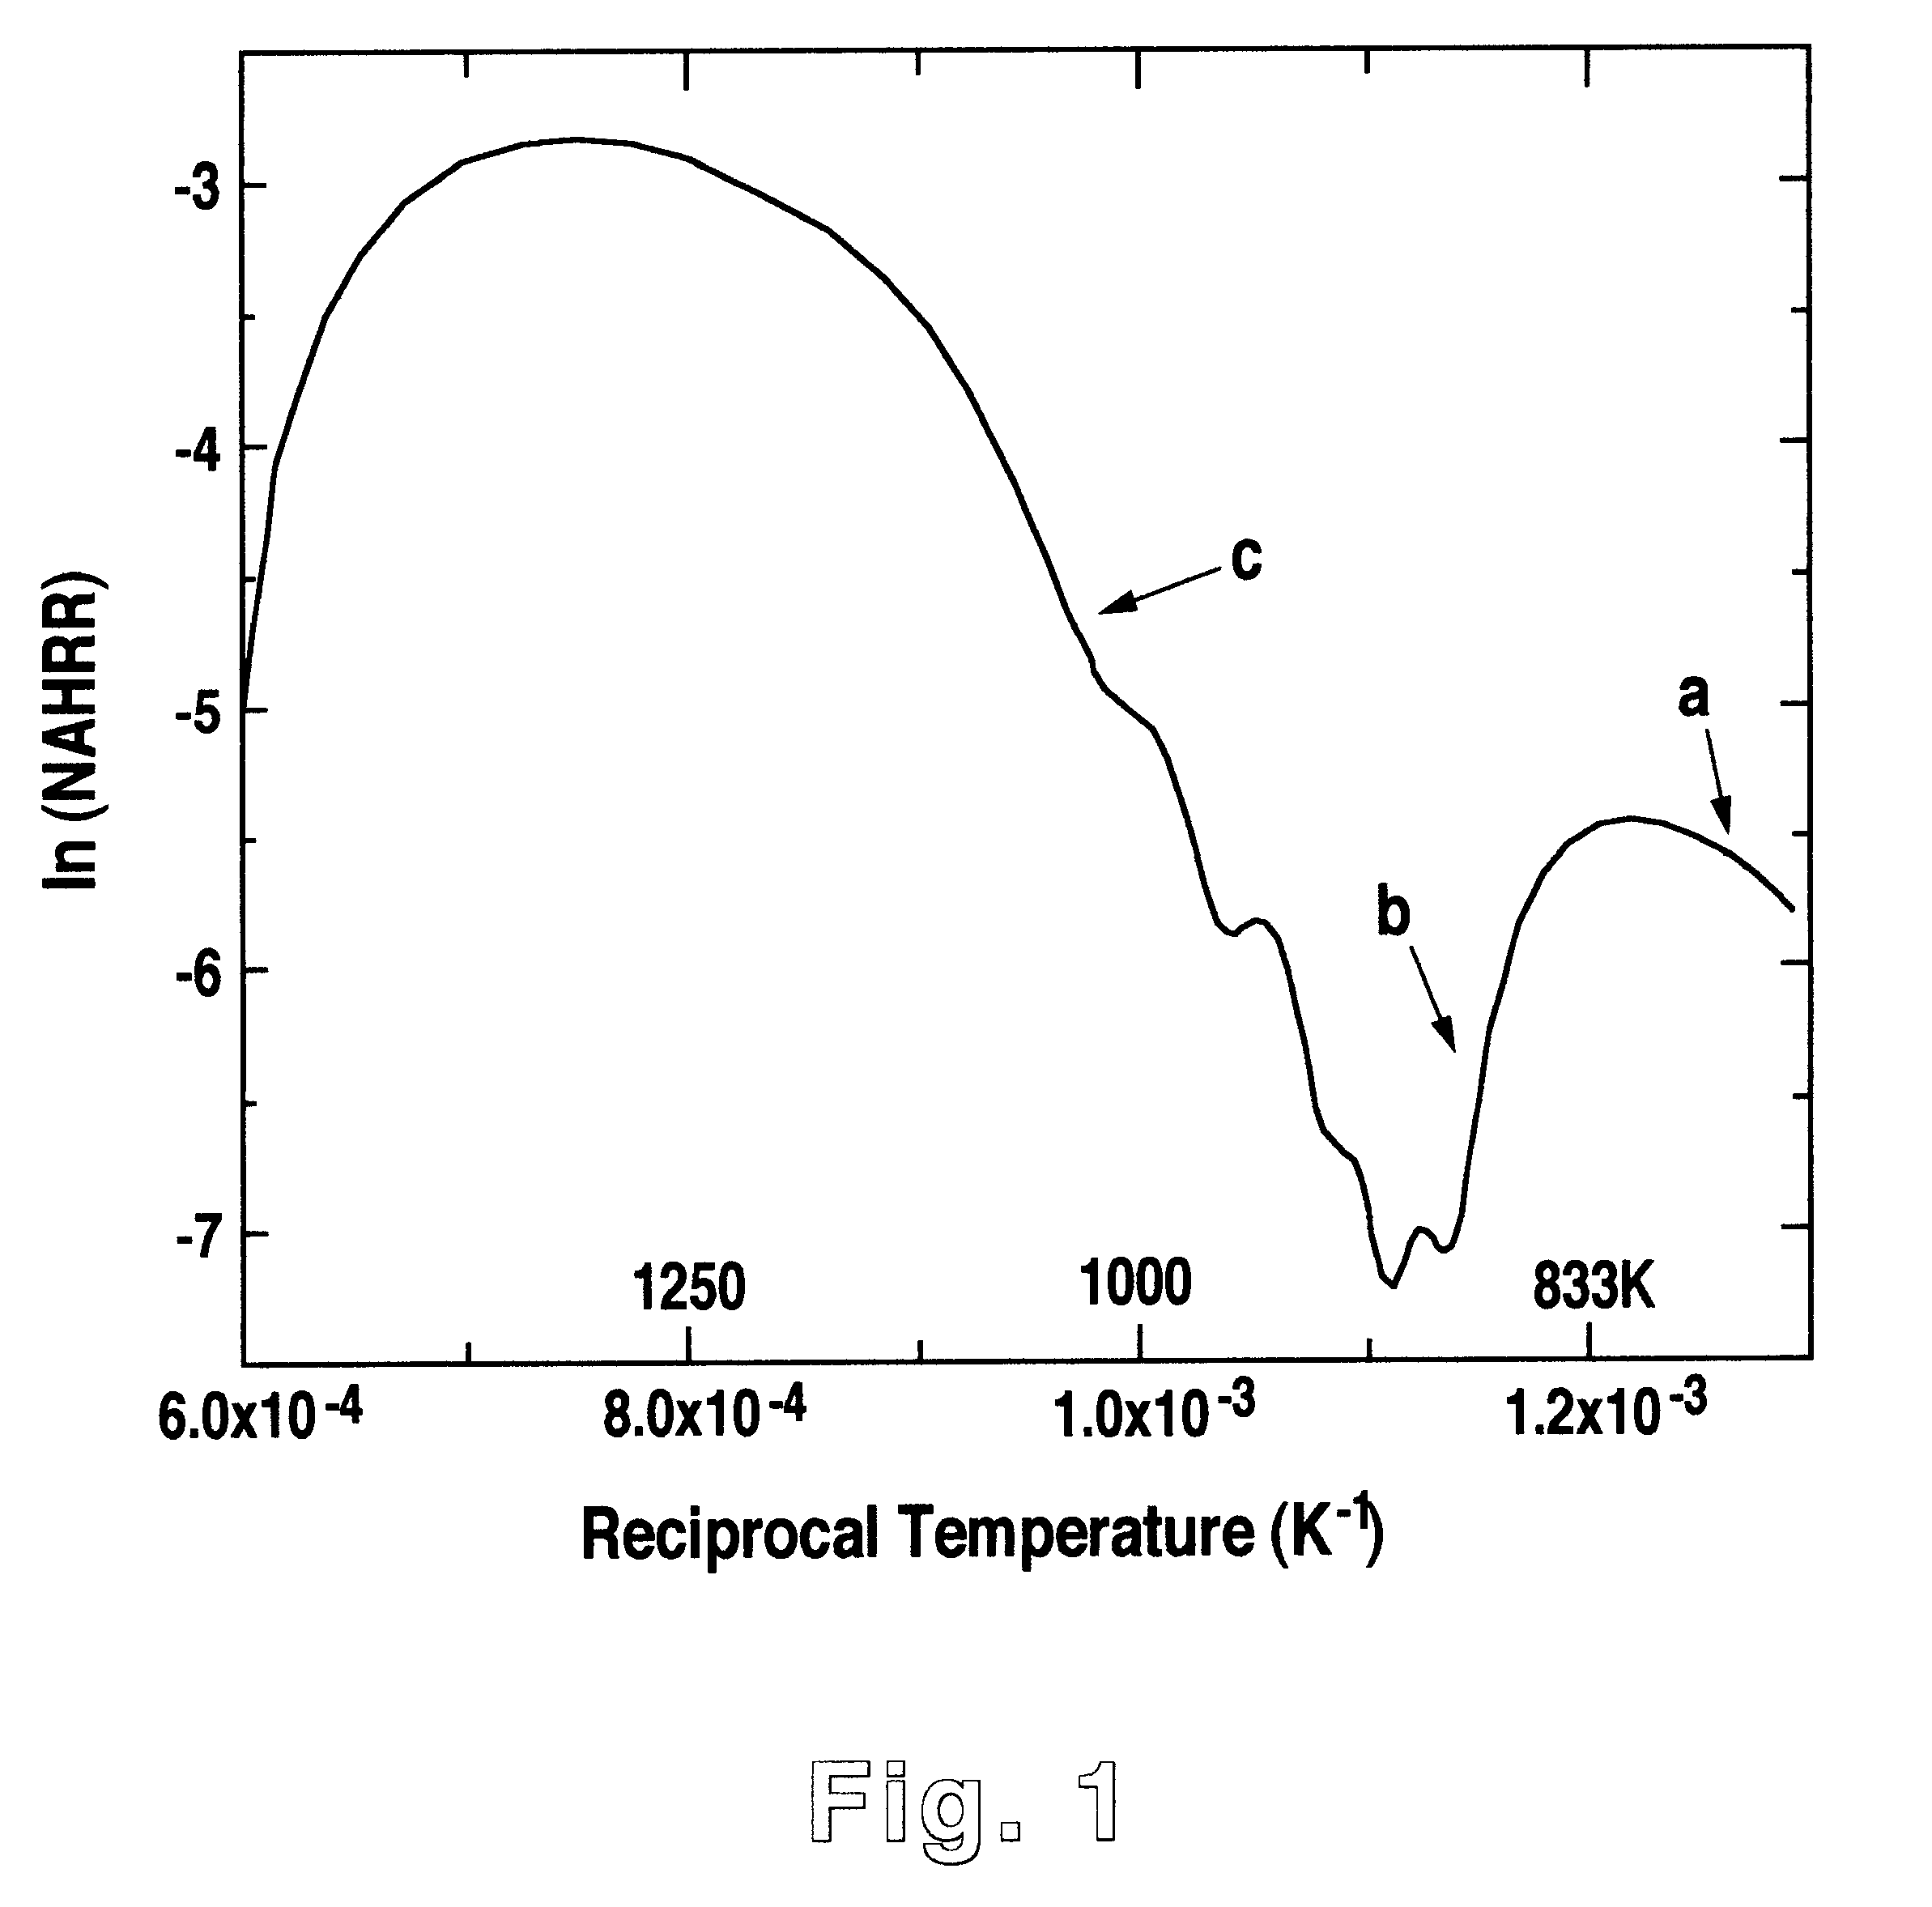 Engine and method for controlling homogenous charge compression ignition combustion in a diesel engine